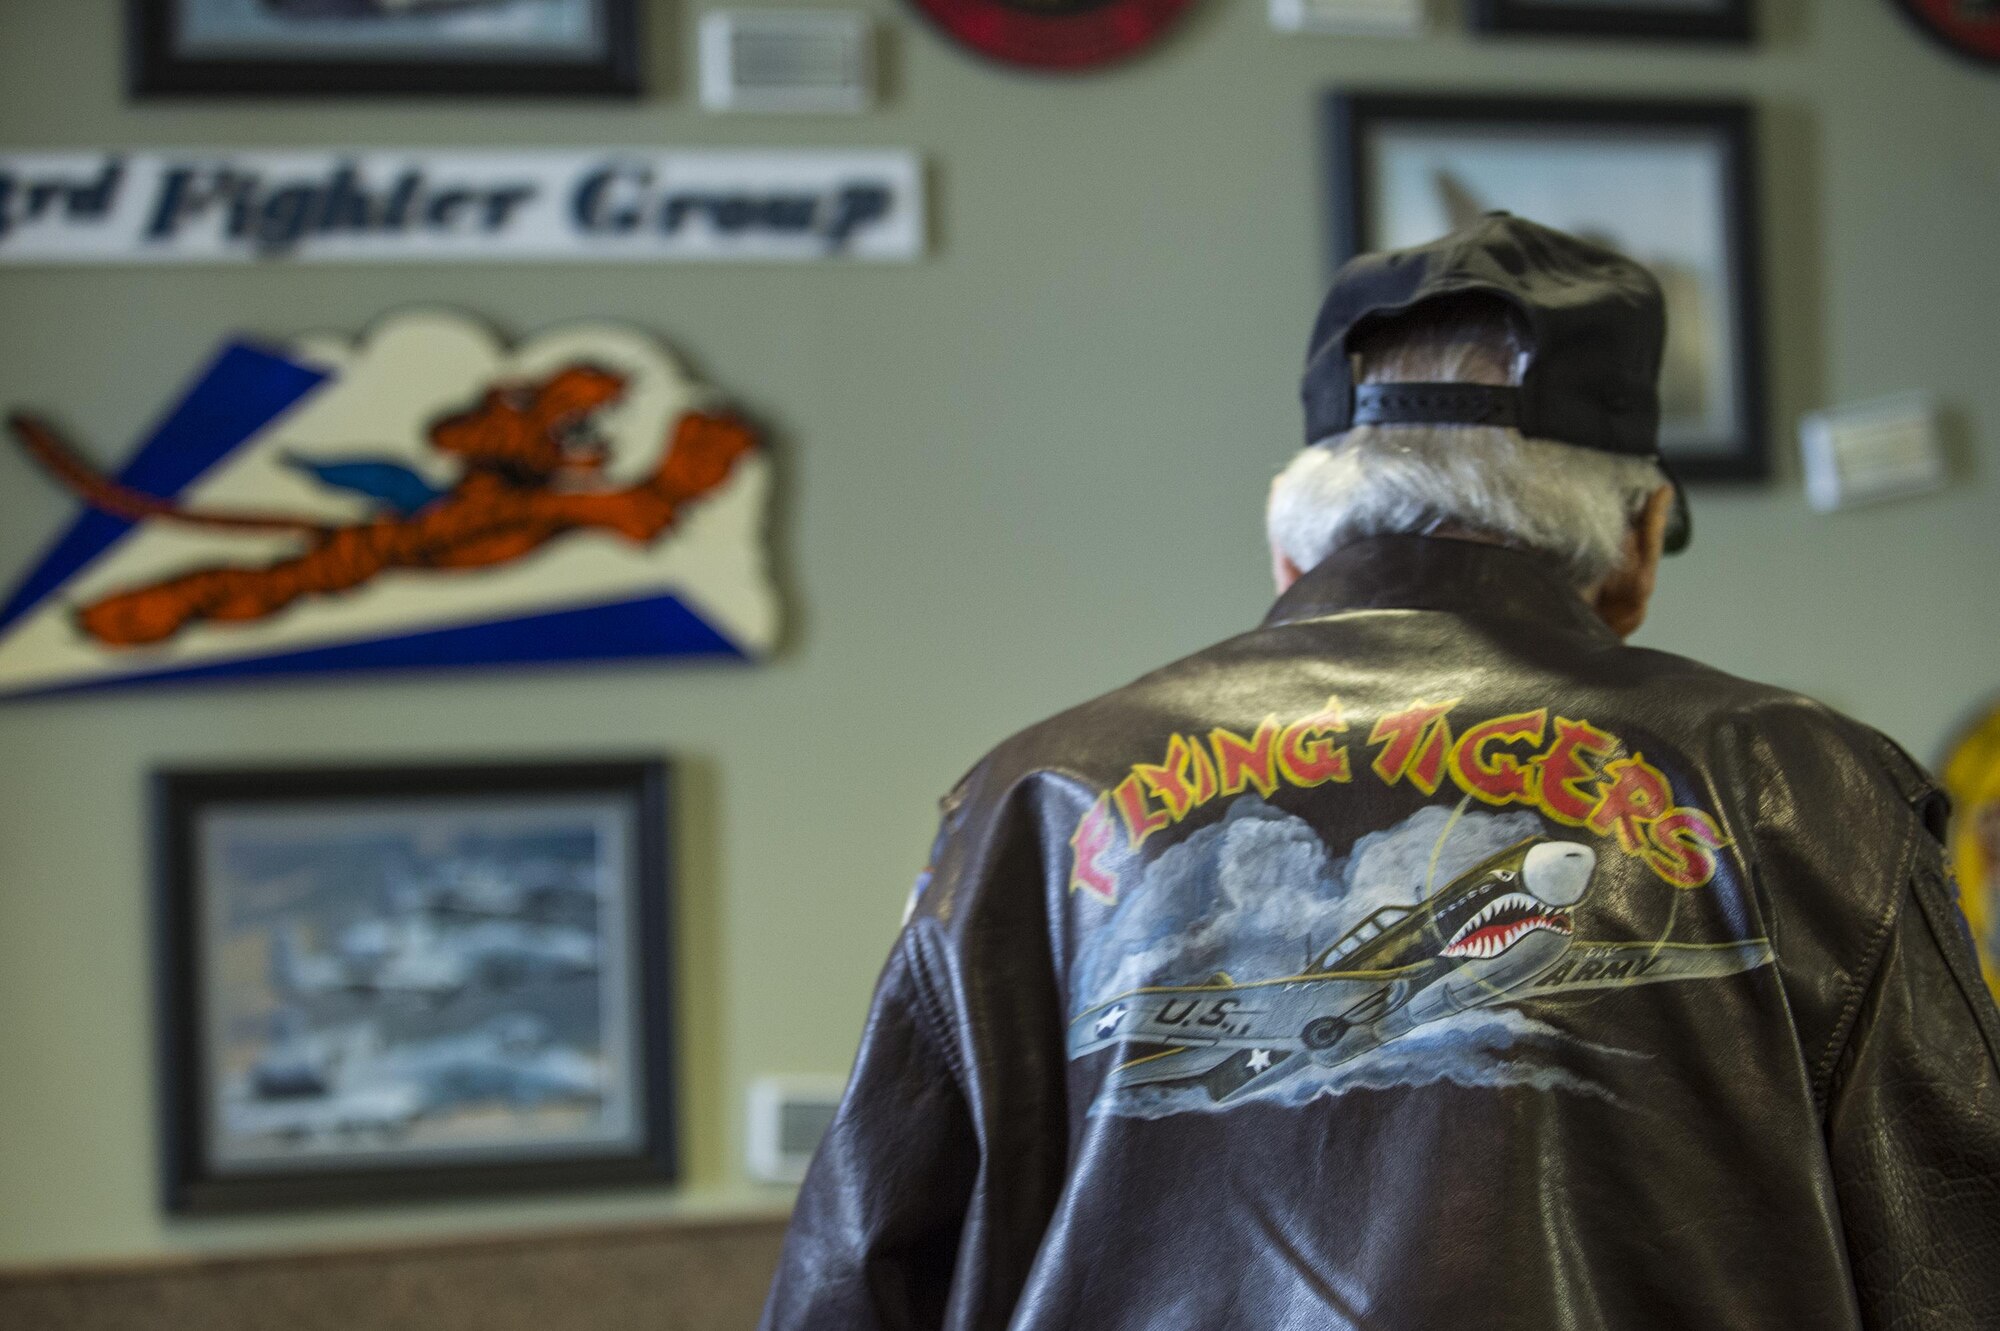 J.M. Taylor, World War II veteran and prisoner of war, looks at a heritage display during the 75th Anniversary Flying Tiger Reunion, March 10, 2017, at Moody Air Force Base, Ga. In 1941, President Roosevelt signed an executive order forming the American Volunteer Group. The AVG was organized into the 1st, 2nd, and 3rd Pursuit Squadrons and later disbanded and replaced by the 23d Fighter Group in 1942. Under the command of Gen. Claire Chennault, the Flying Tigers comprised of the 74th, 75th, and 76th Pursuit Squadrons defended China against the Japanese. Throughout World War II, the Flying Tigers achieved combat success and flew the US-made Curtiss P-40 Warhawks painted with the shark-mouth design. (U.S. Air Force photo by Senior Airman Ceaira Young)